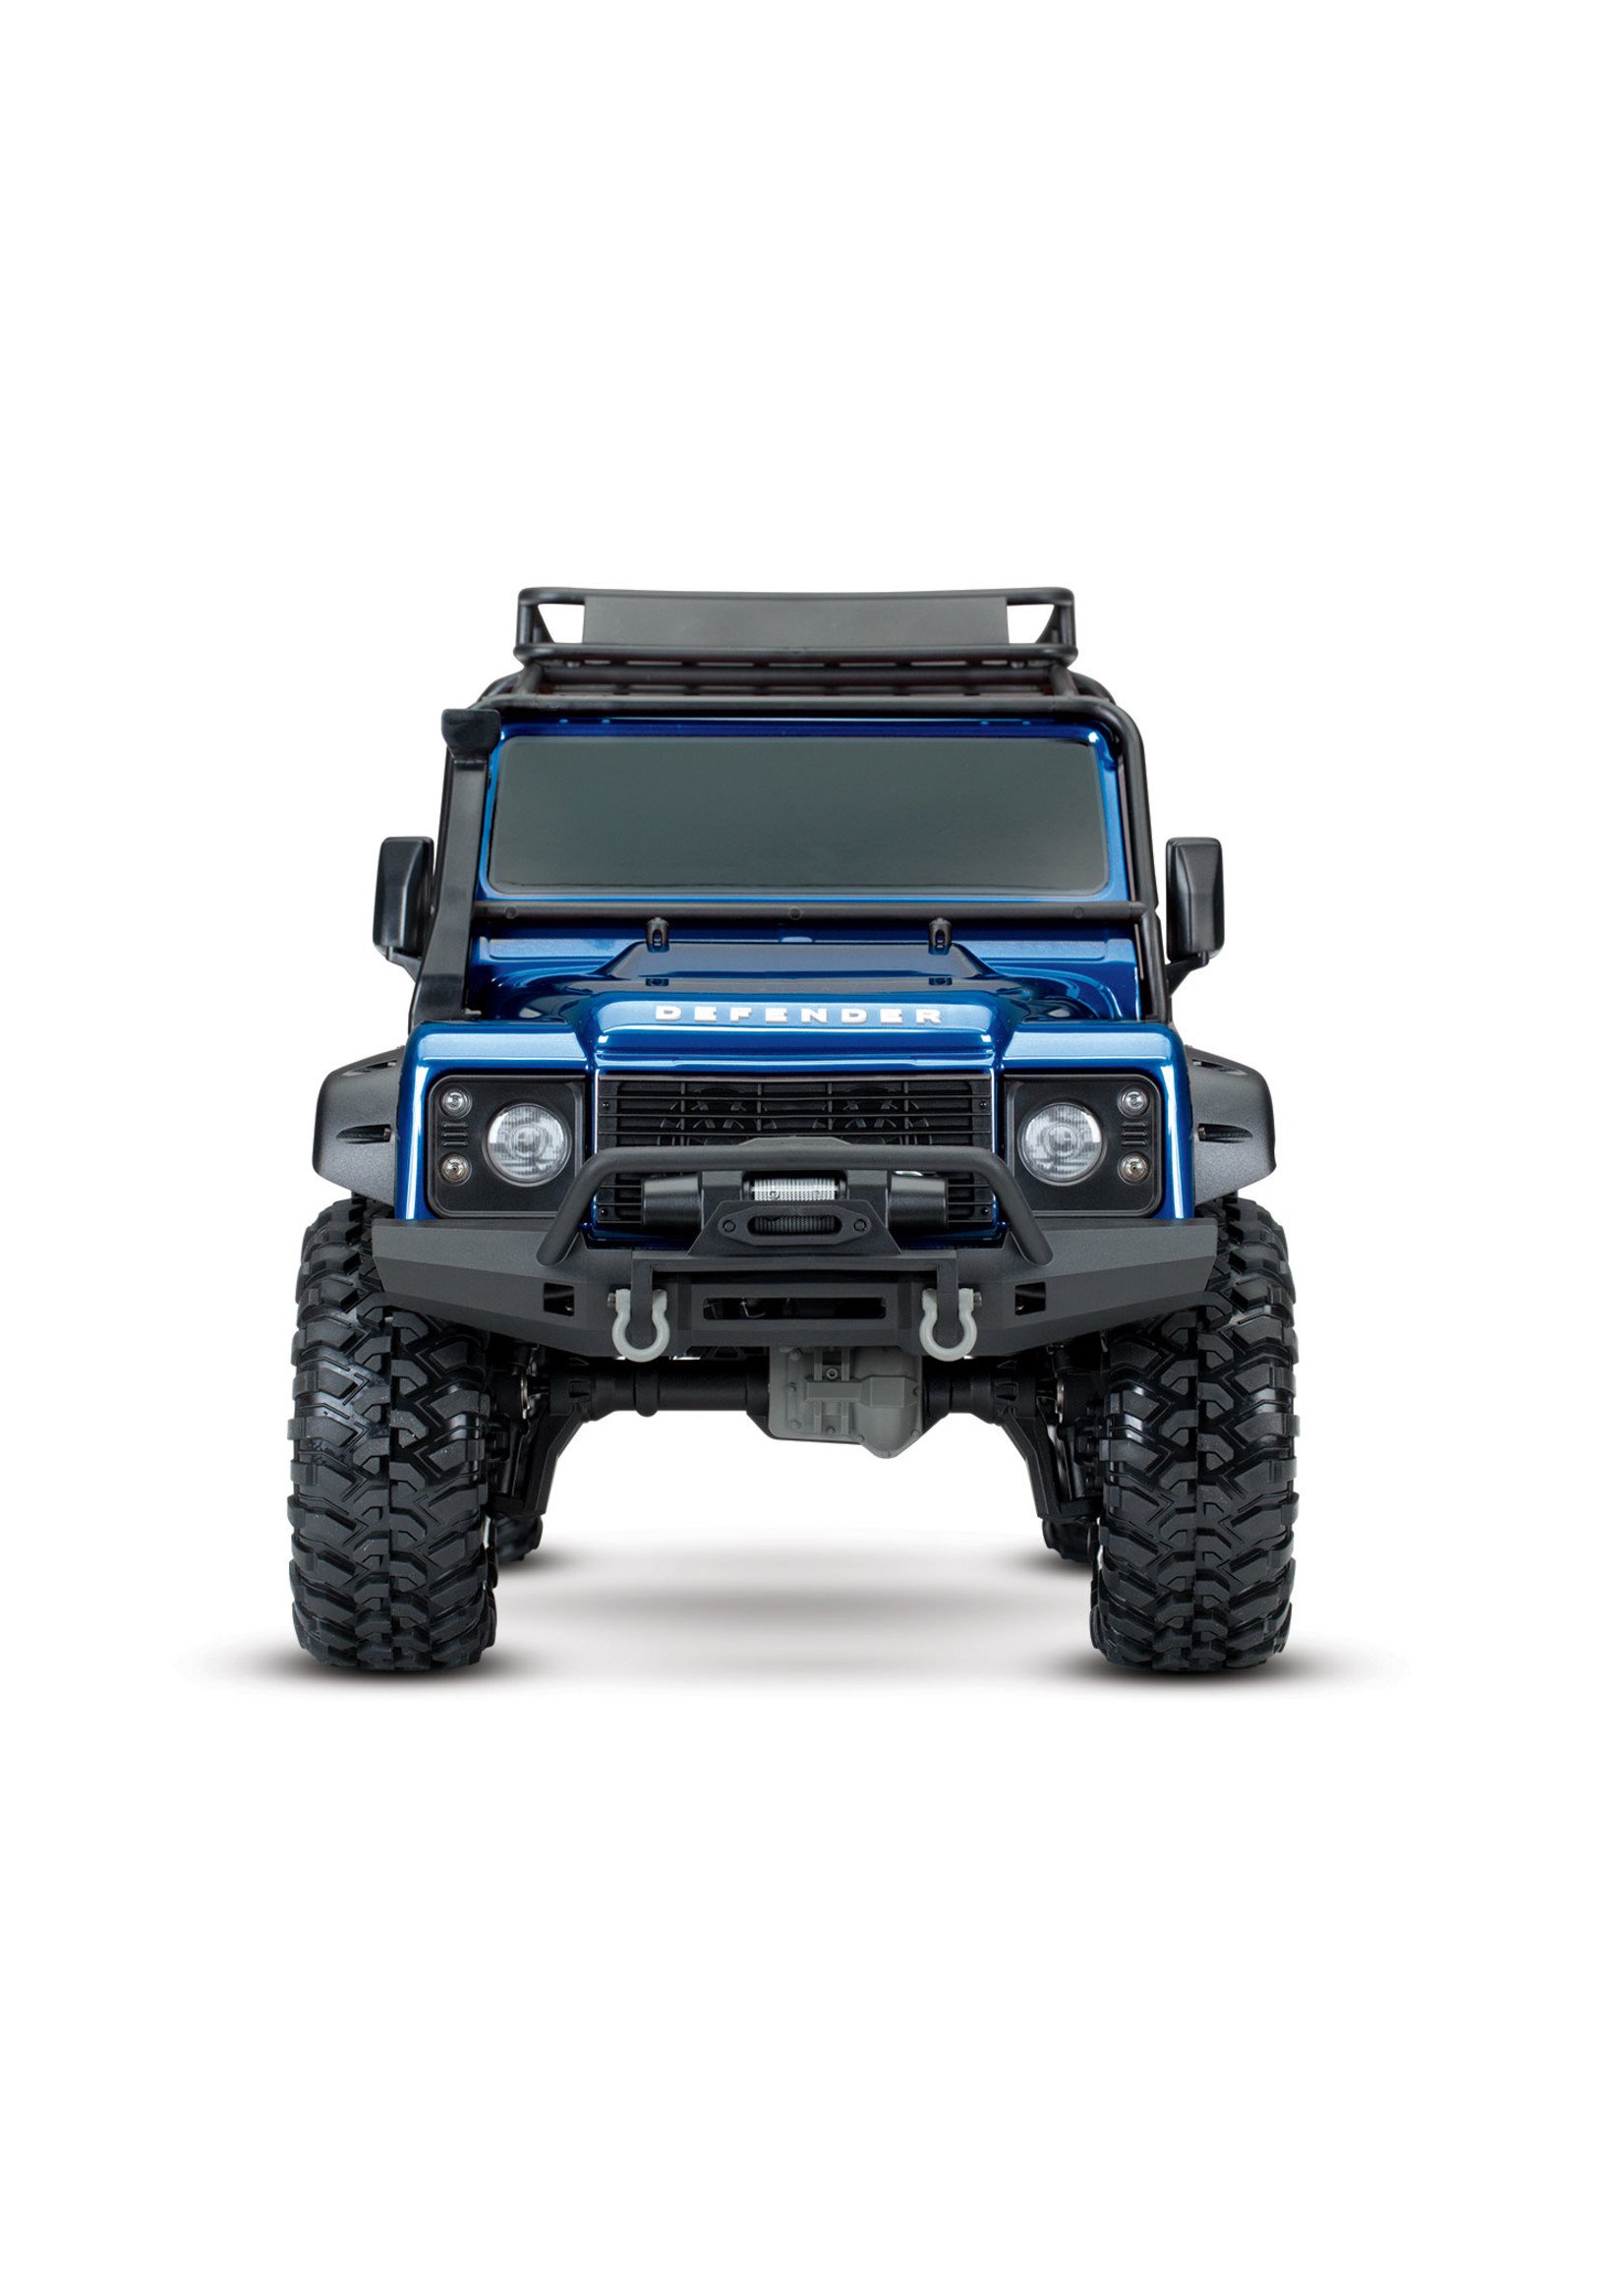 Traxxas 1/10 TRX-4 Defender RTR Scale and Trail Crawler - Blue